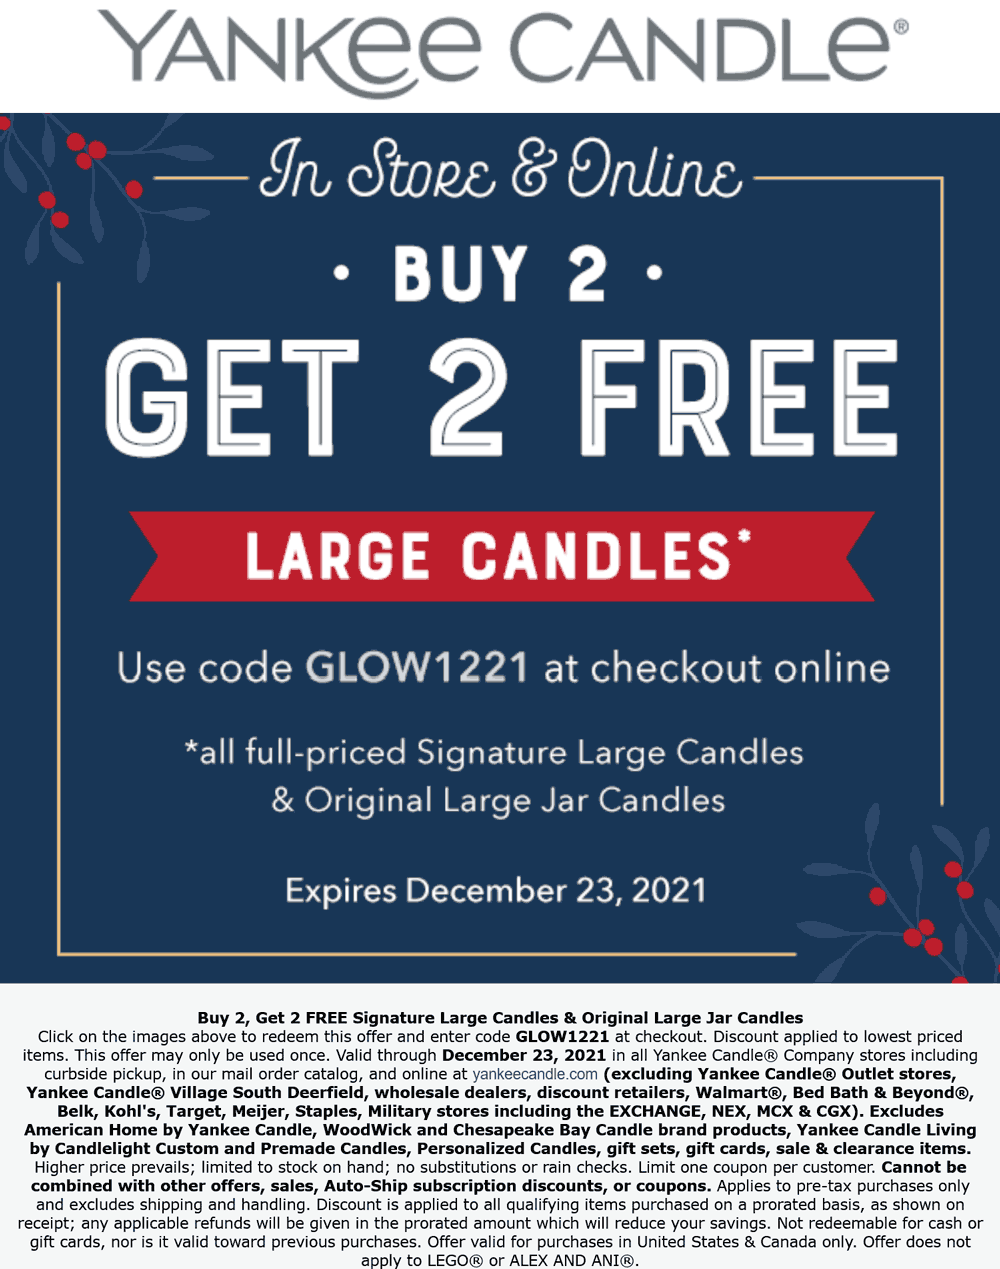 Yankee Candle stores Coupon  4-for-2 on large candles at Yankee Candle, or online via promo code GLOW1221 #yankeecandle 